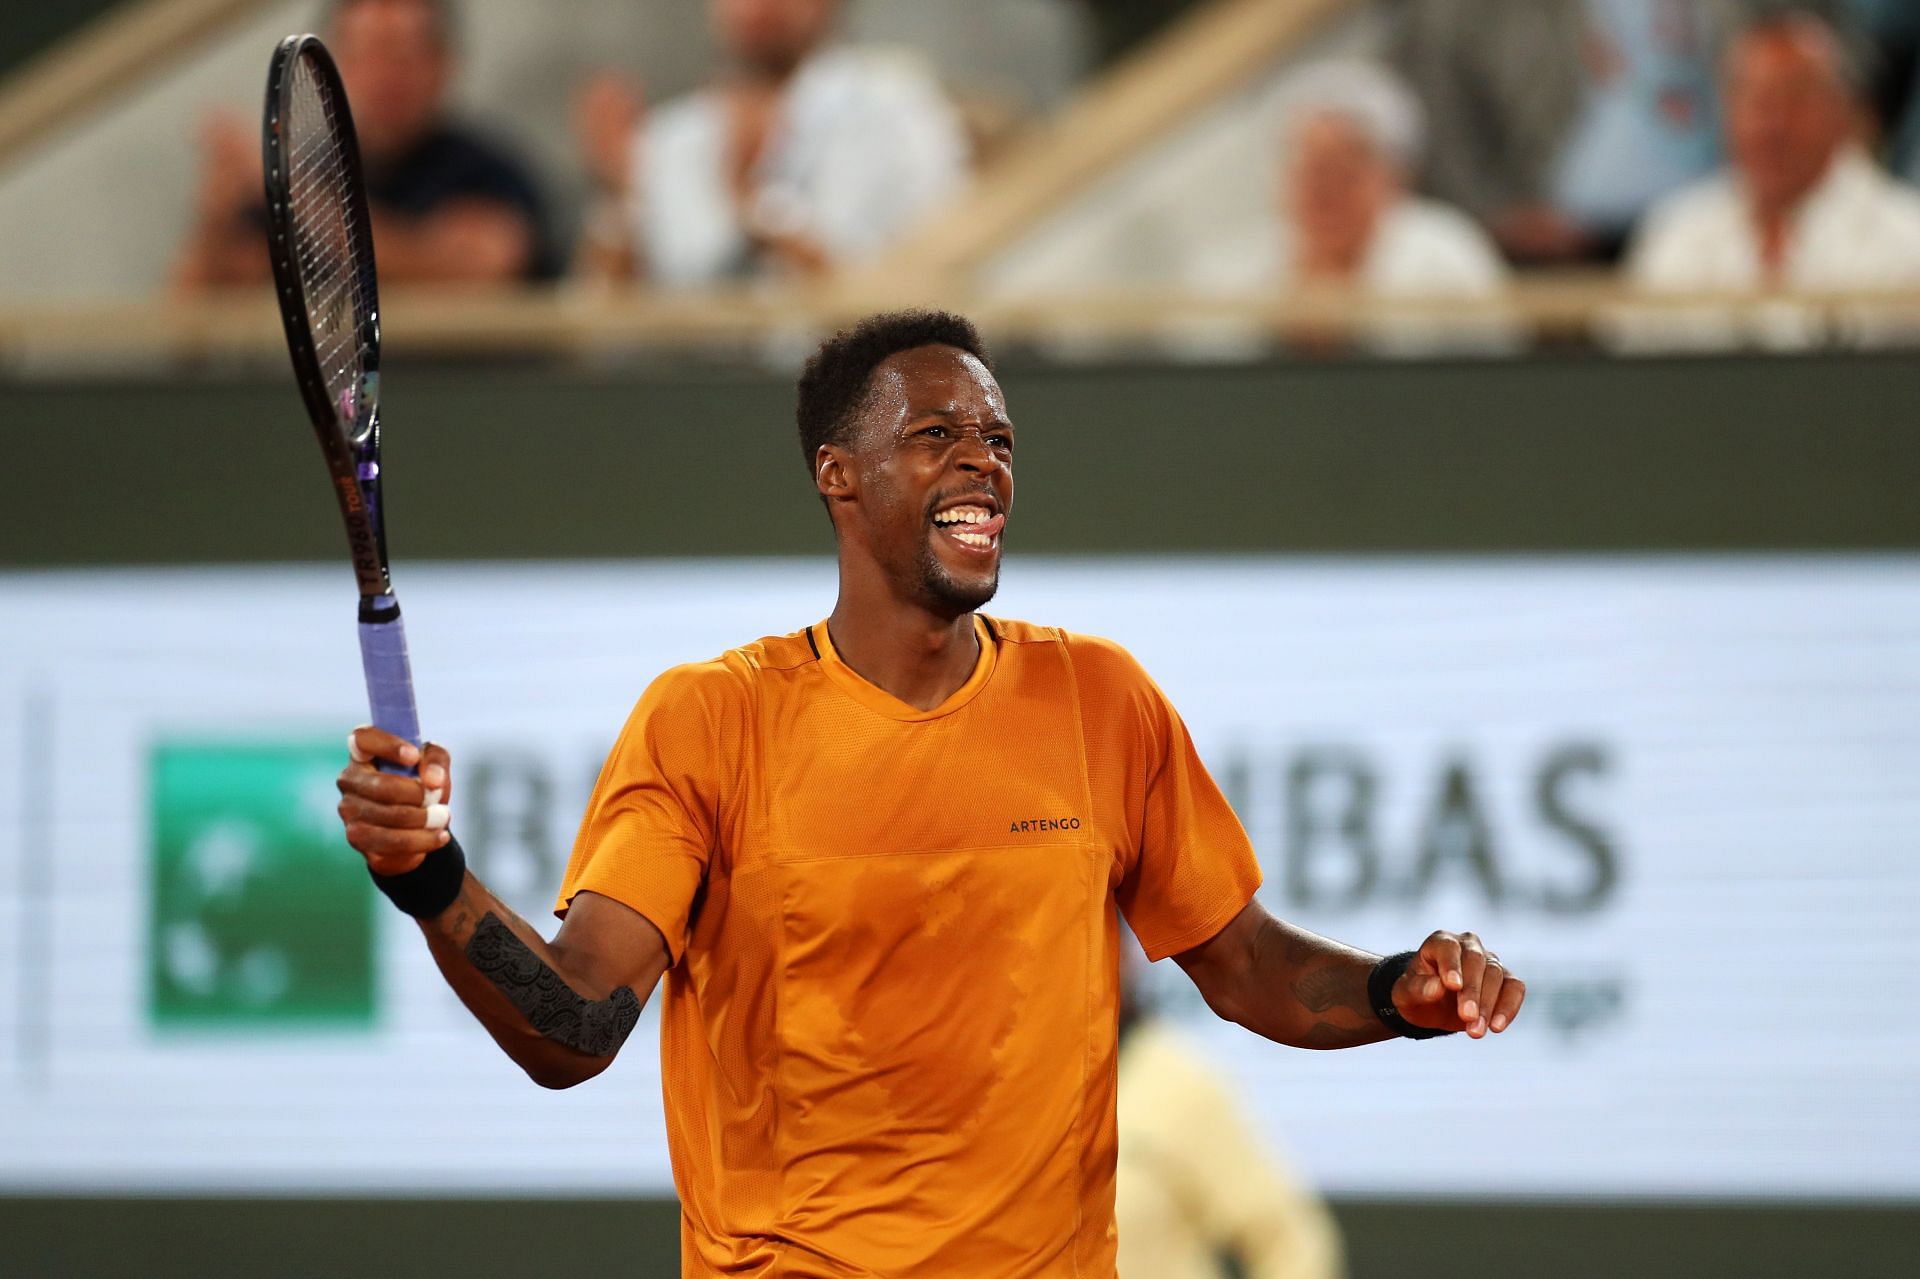 Gael Monfils defeated Sebastian Baez in the first round of the 2023 French Open